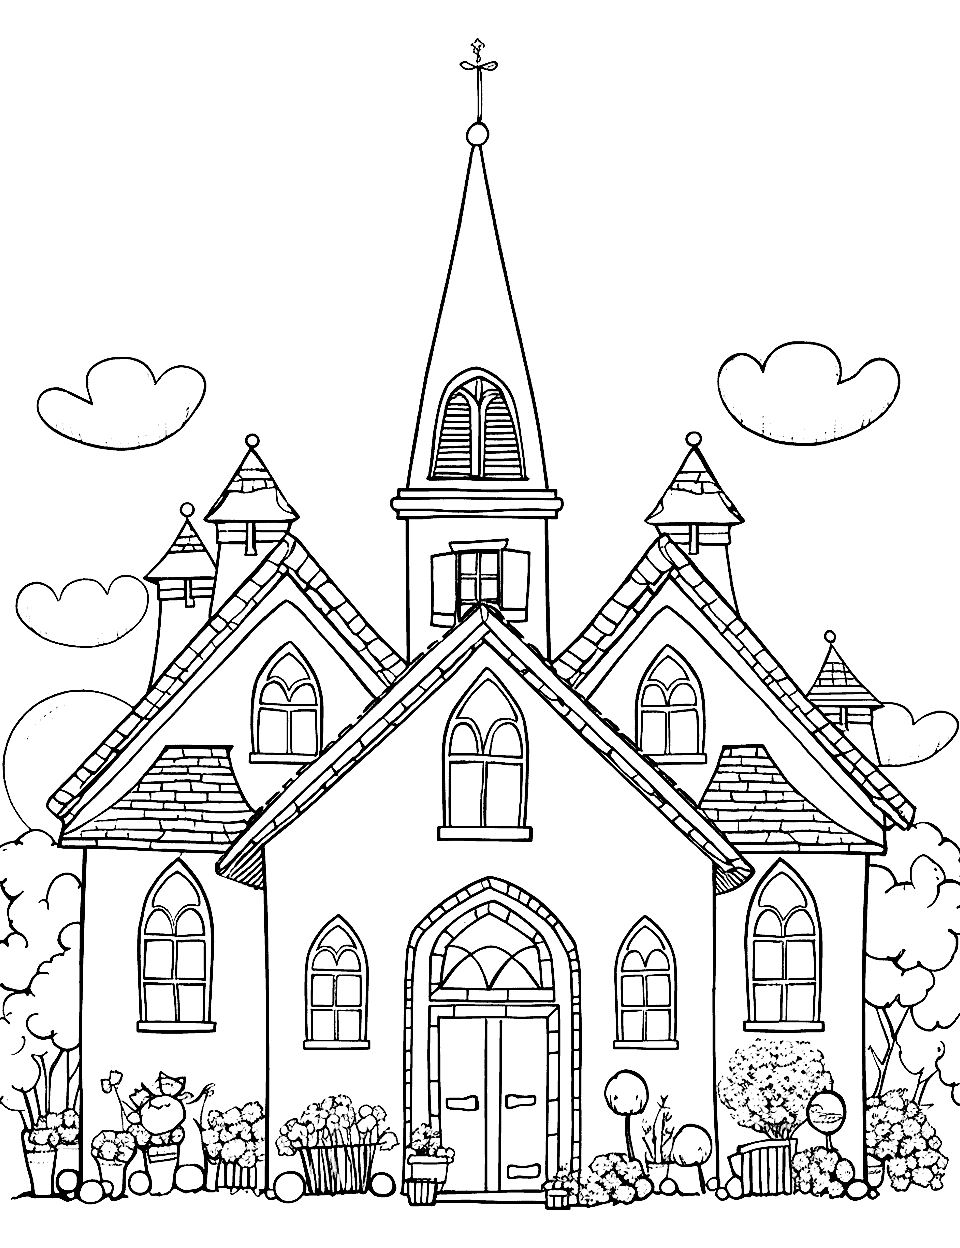 Church Easter Celebration Coloring Page - A church decorated with flowers and Easter decorations representing the festive atmosphere.